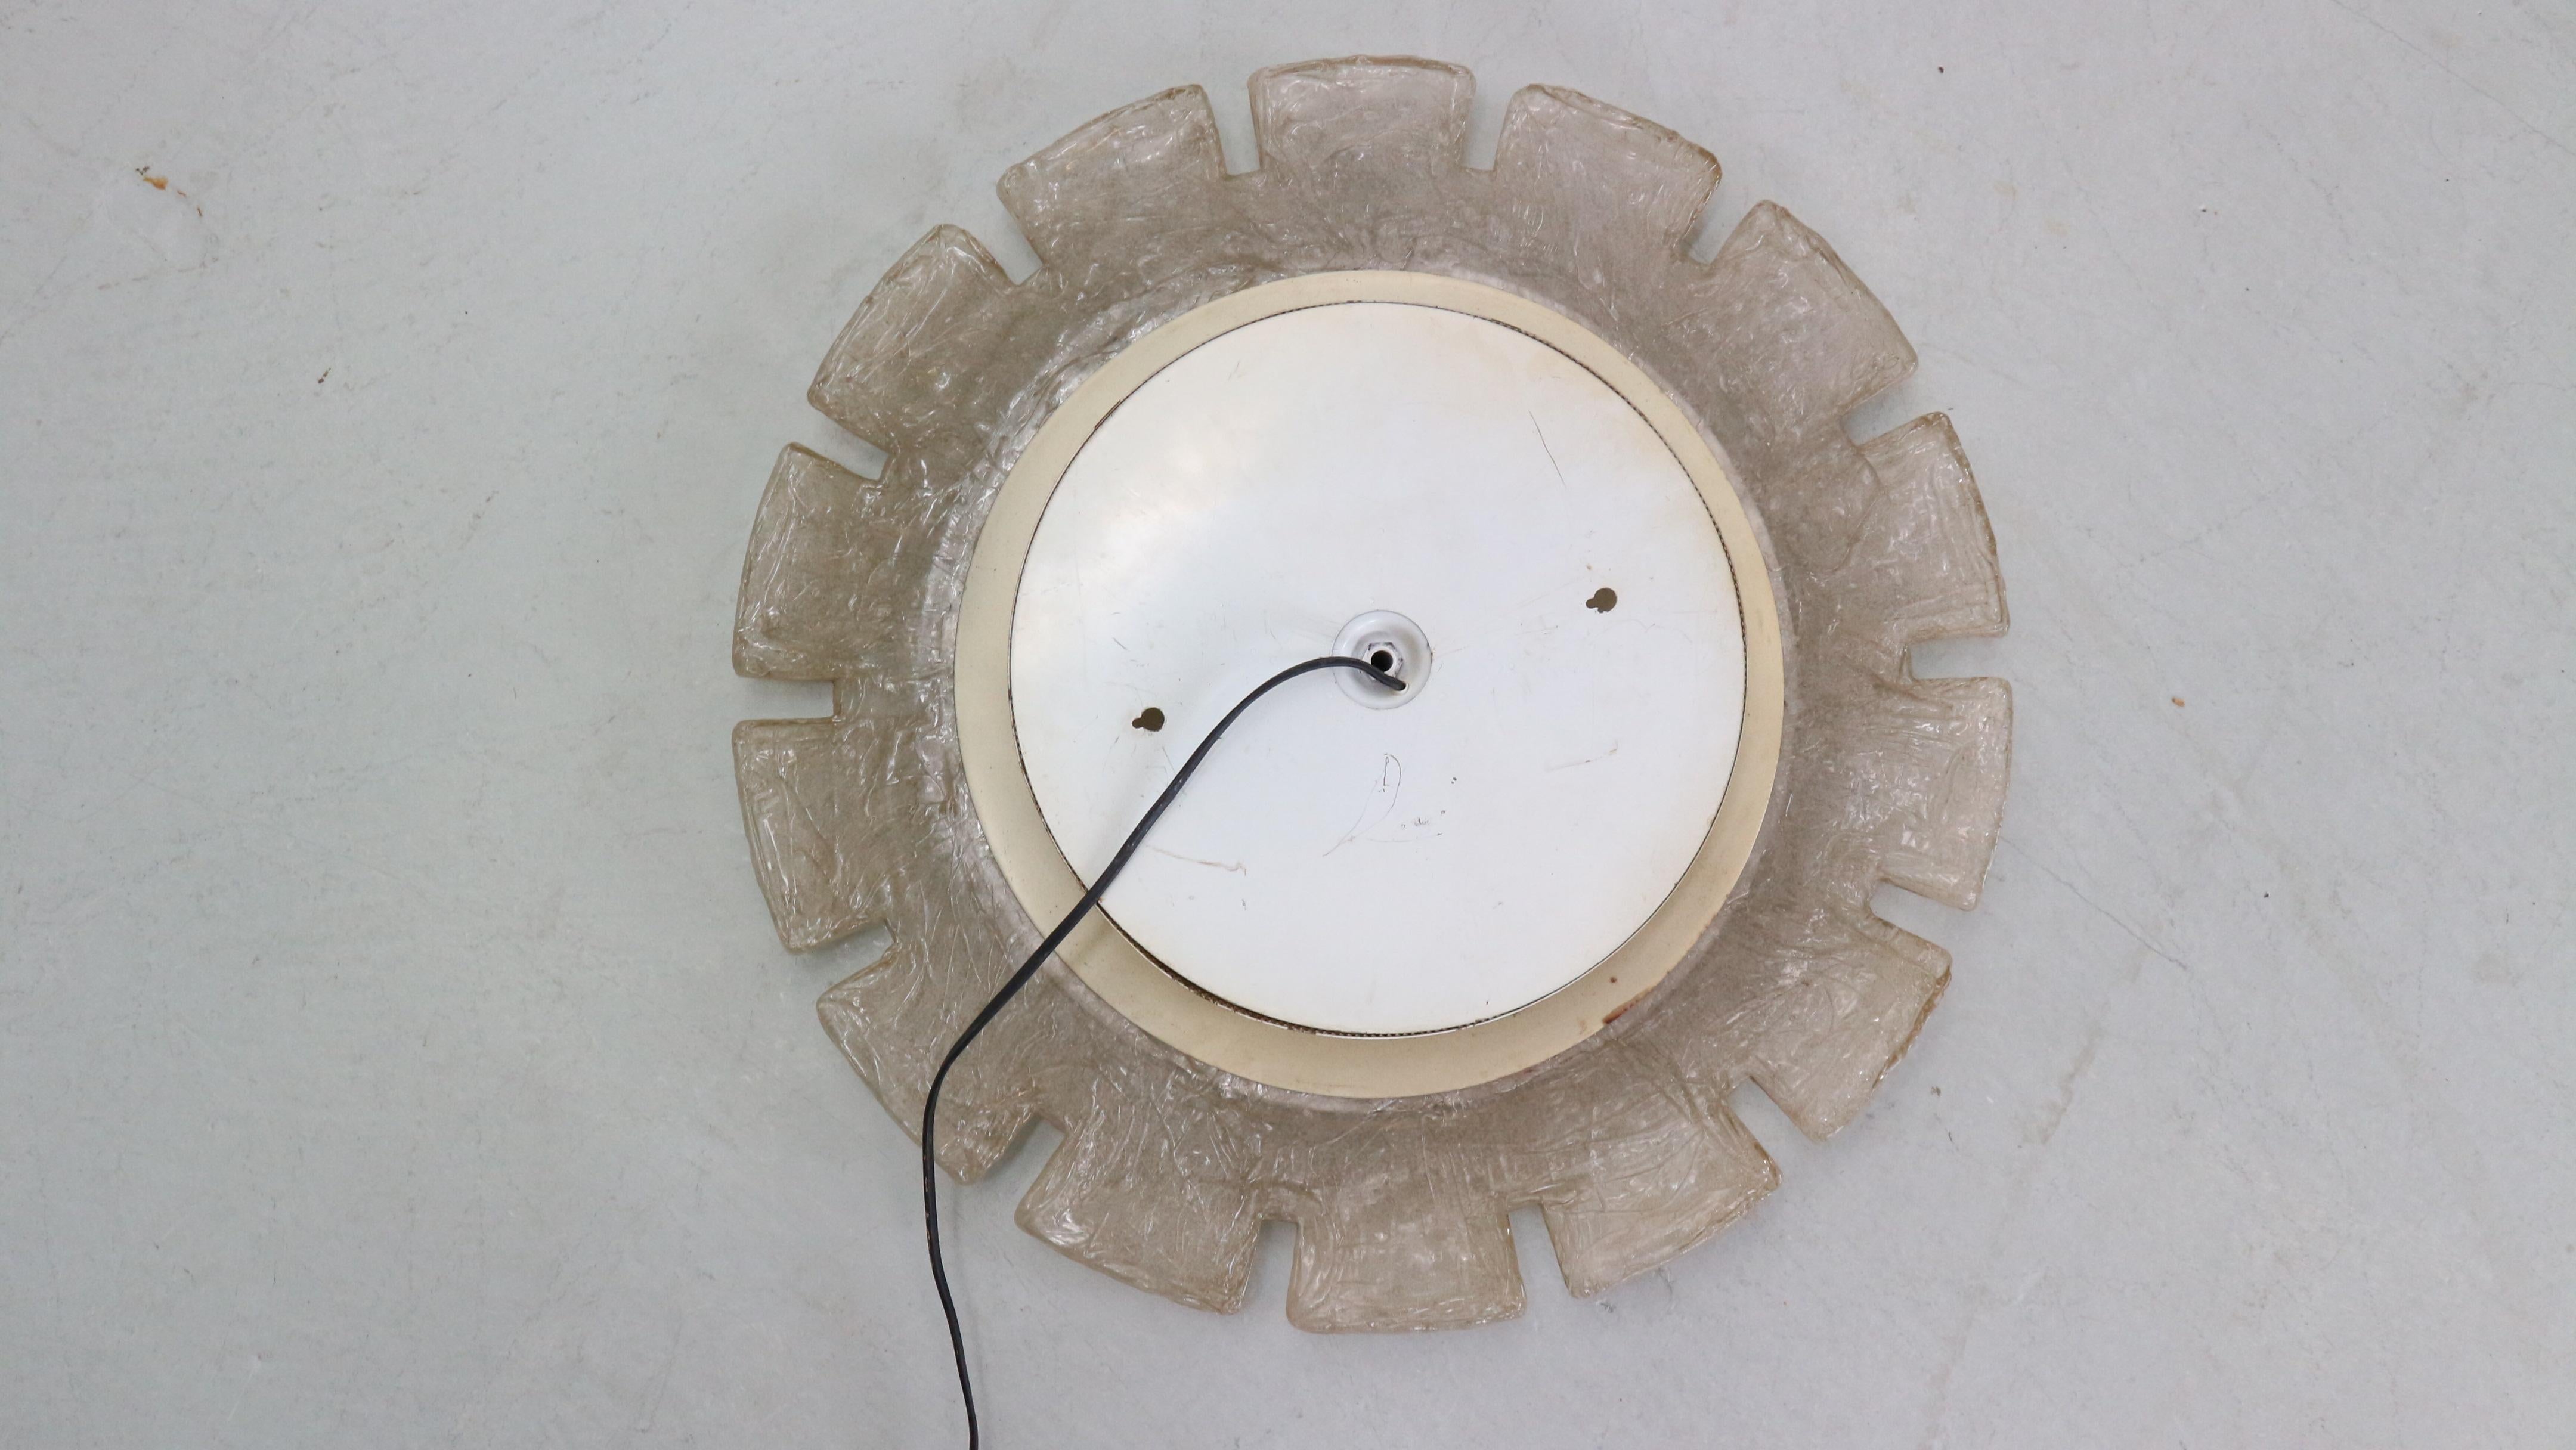 Egon Hillebrand Round Acrylic Illuminated Mirror With Lightening, 1970's Germany For Sale 12